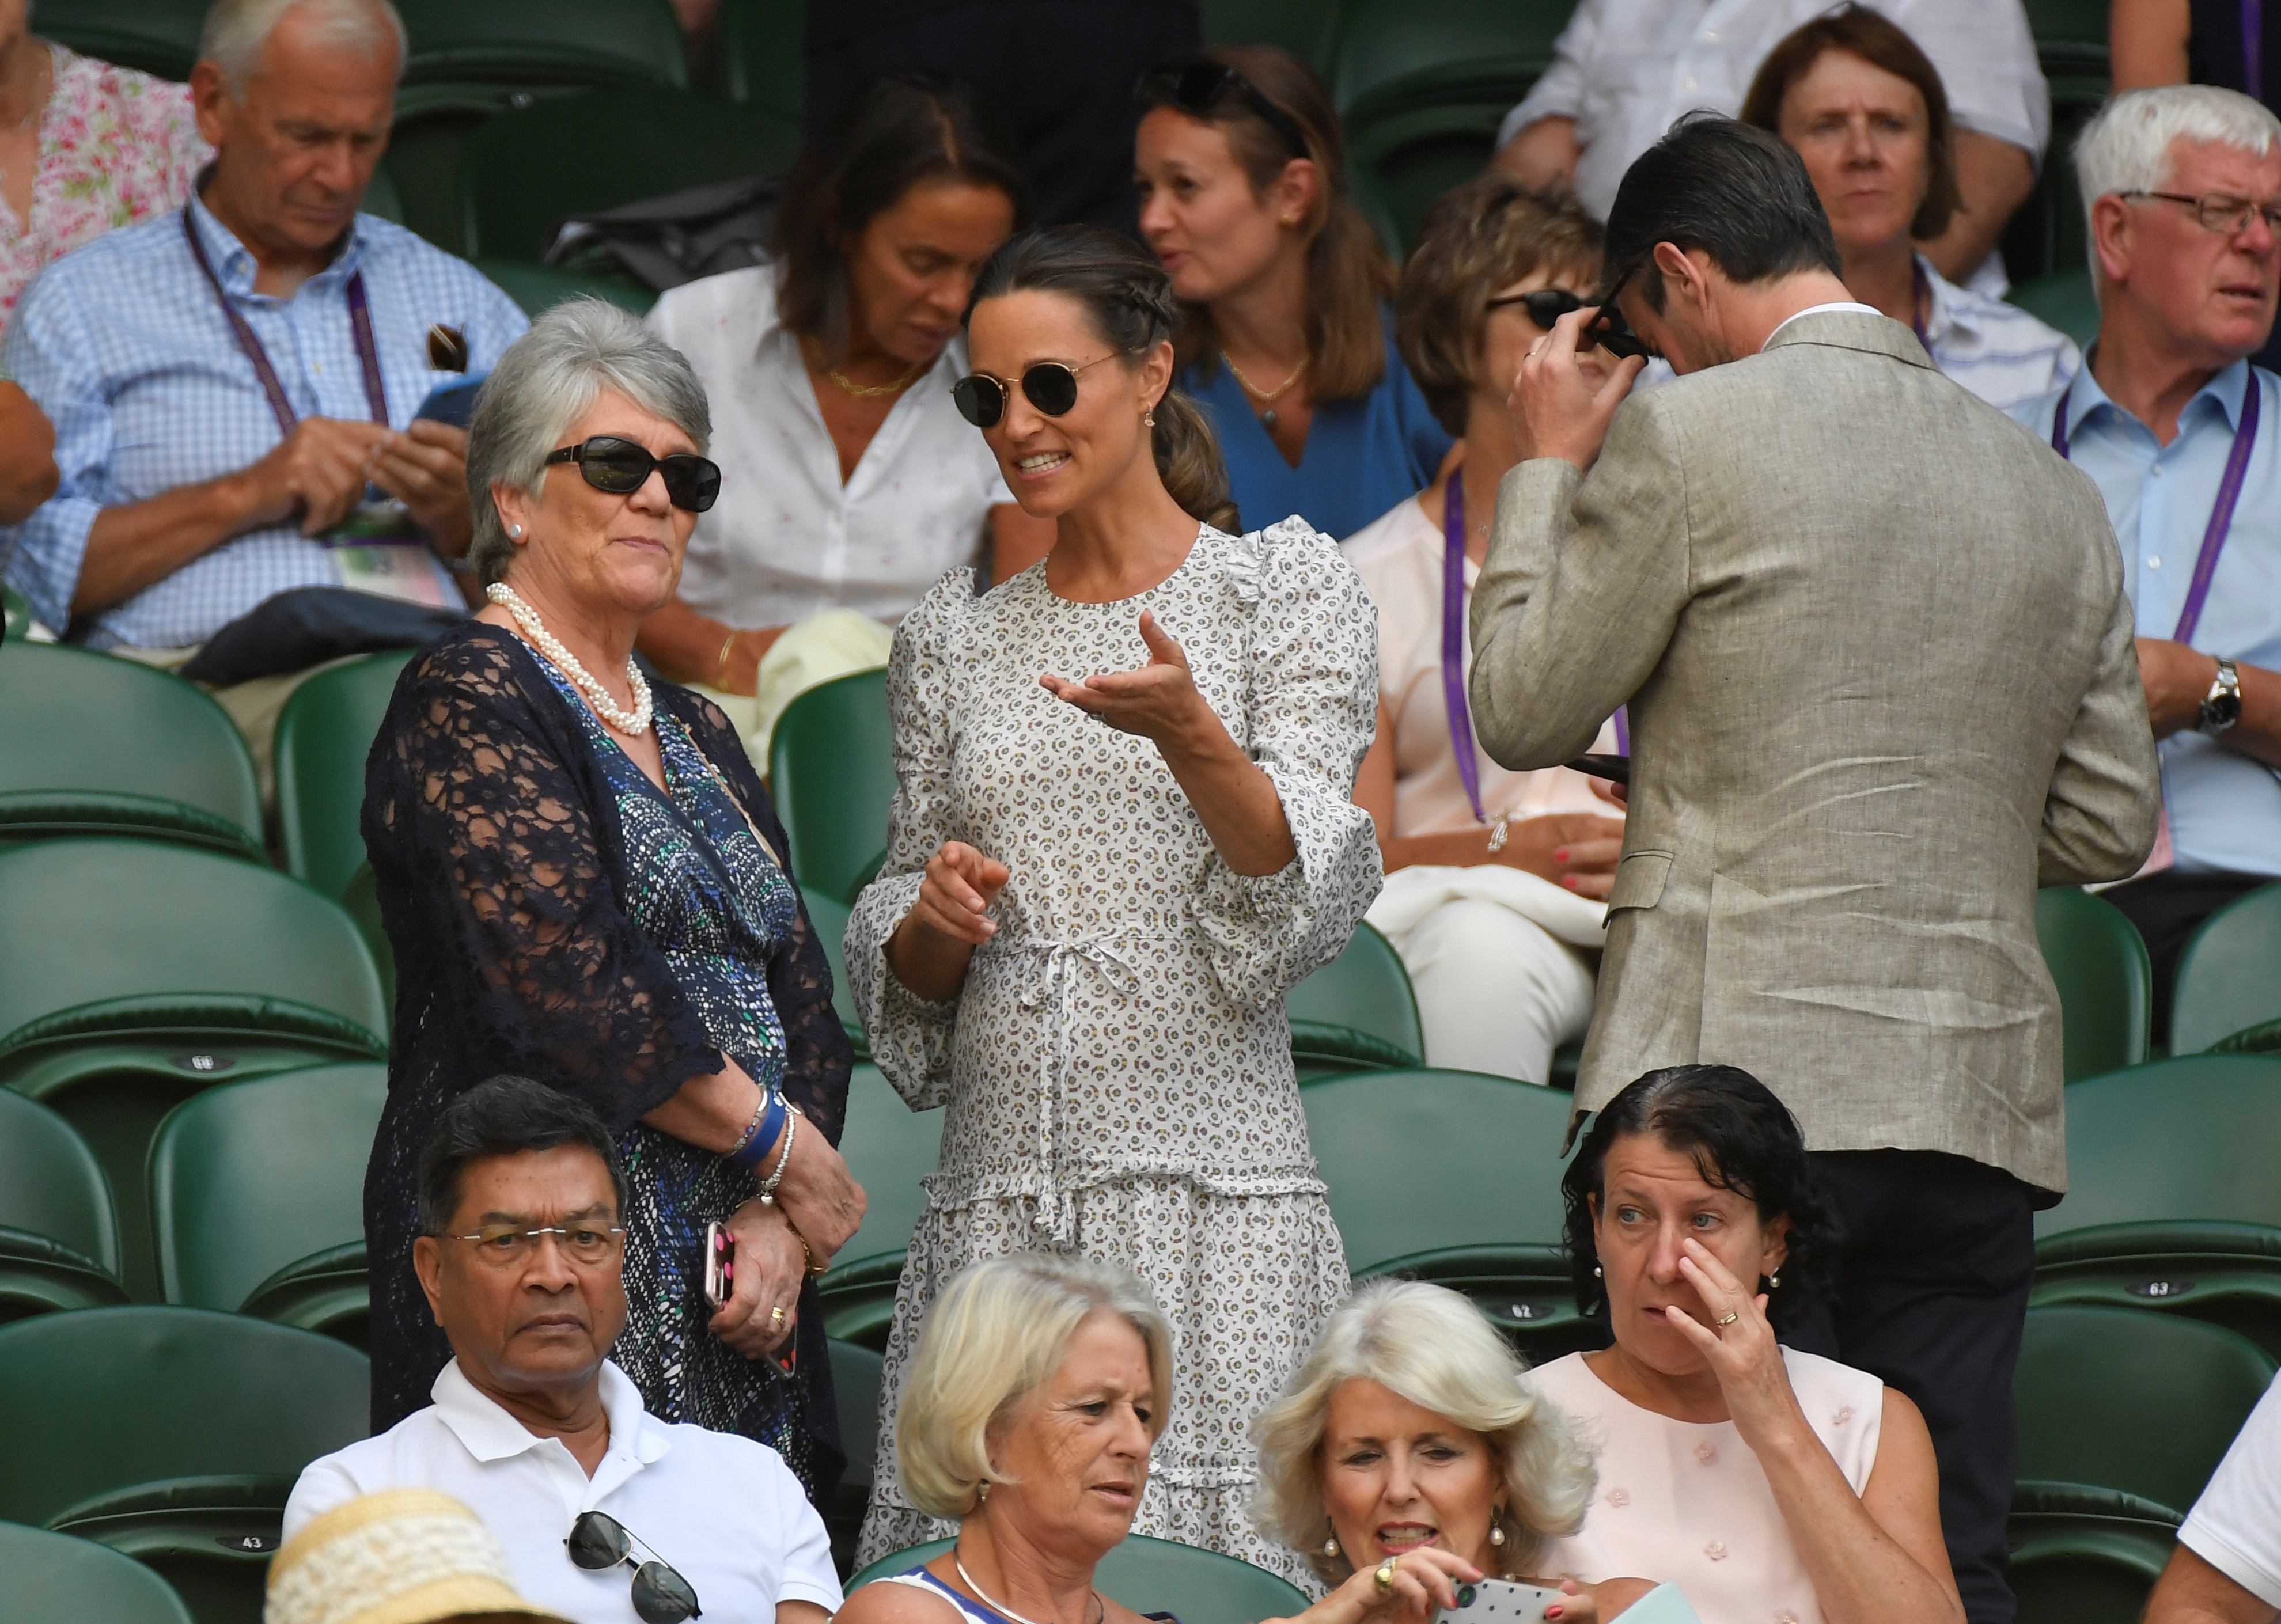 Tennis - Wimbledon - All England Lawn Tennis and Croquet Club, London, Britain - July 13, 2018  Pippa Middleton with her husband James Matthews in the stands on centre court  REUTERS/Toby Melville - RC1FA03E4B00